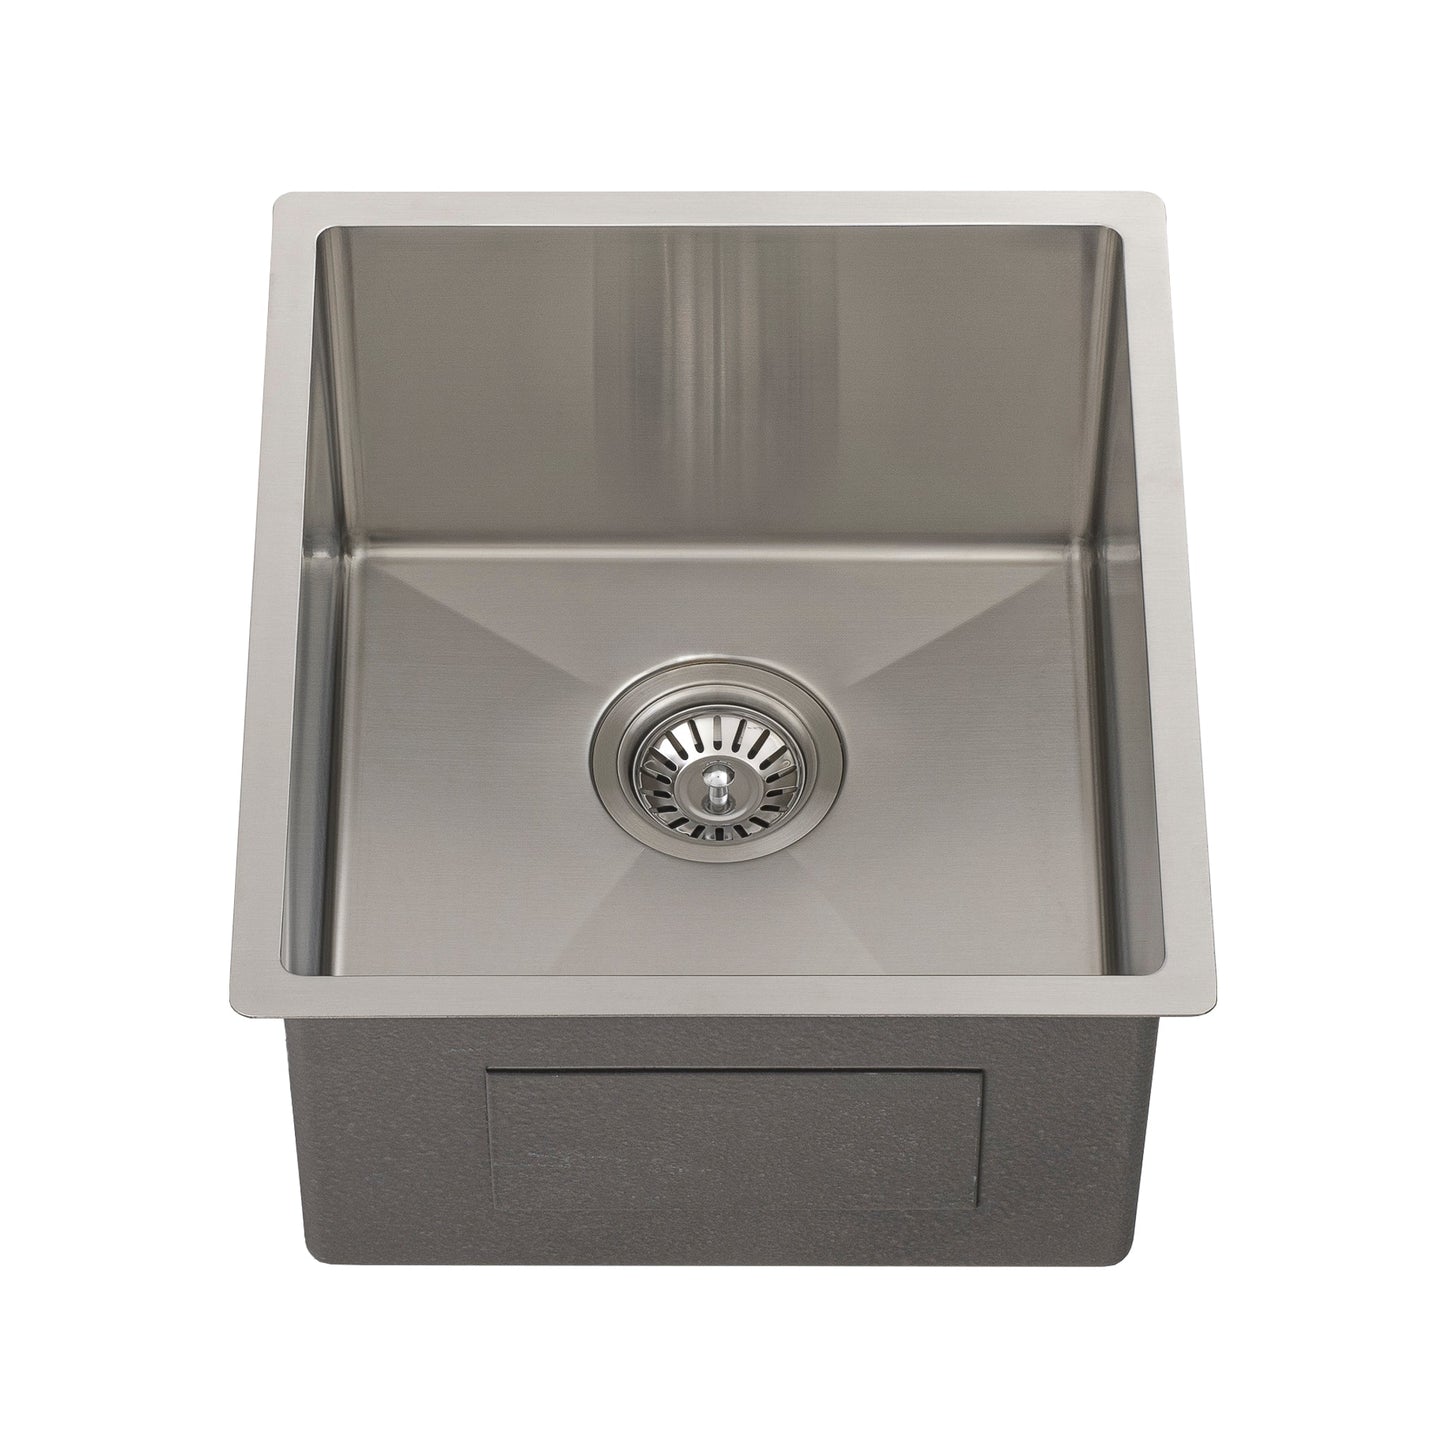 Retto II 390mm x 440mm x 230mm Stainless Steel Sink, Brushed Nickel Silver